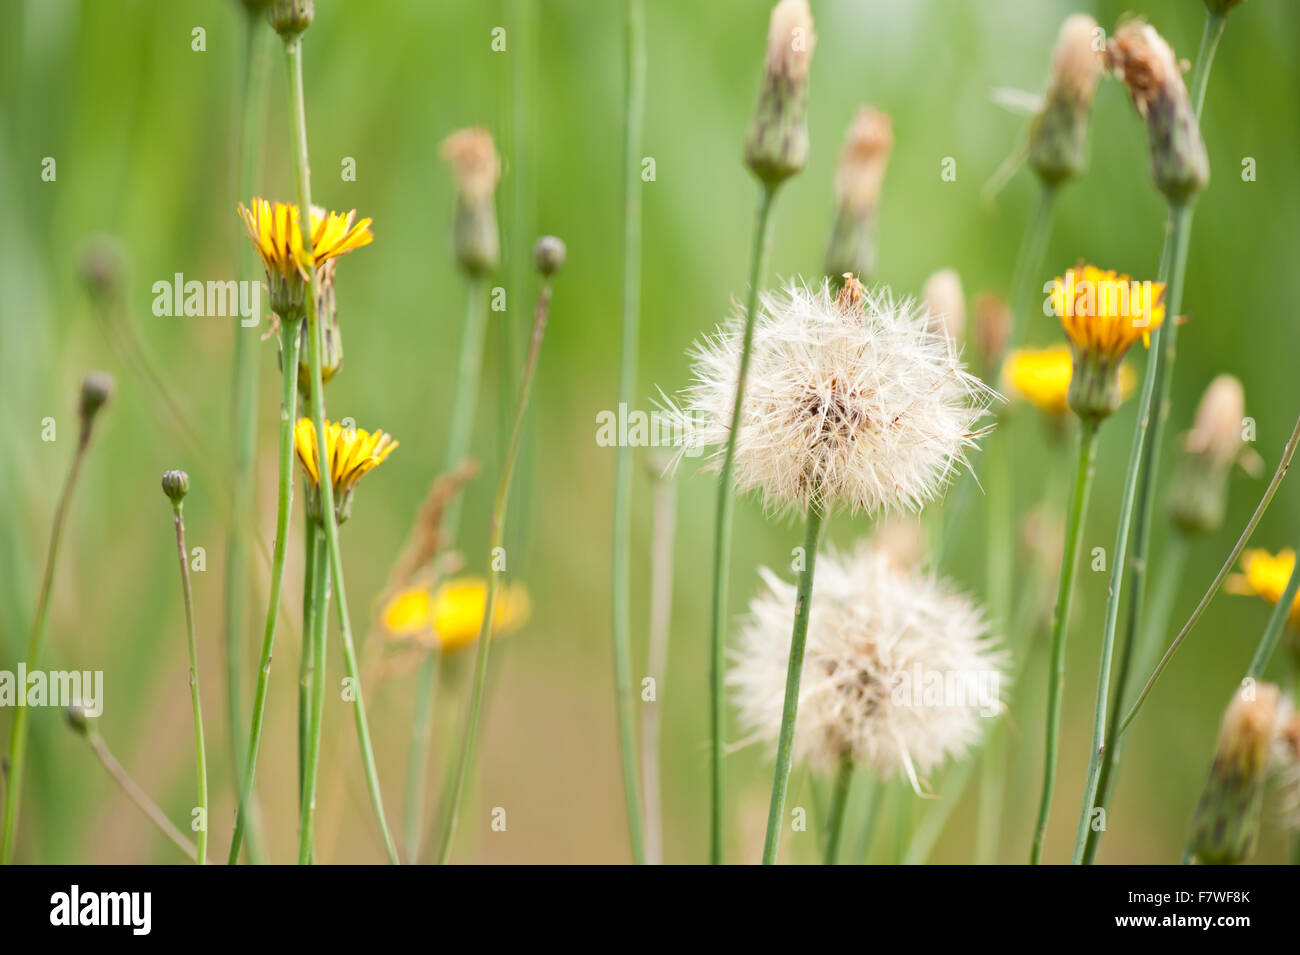 Taraxacum seed white head, Dandelion yellow flowering and shed herbal medicine perennial in the Asteraceae family, plants bloom Stock Photo